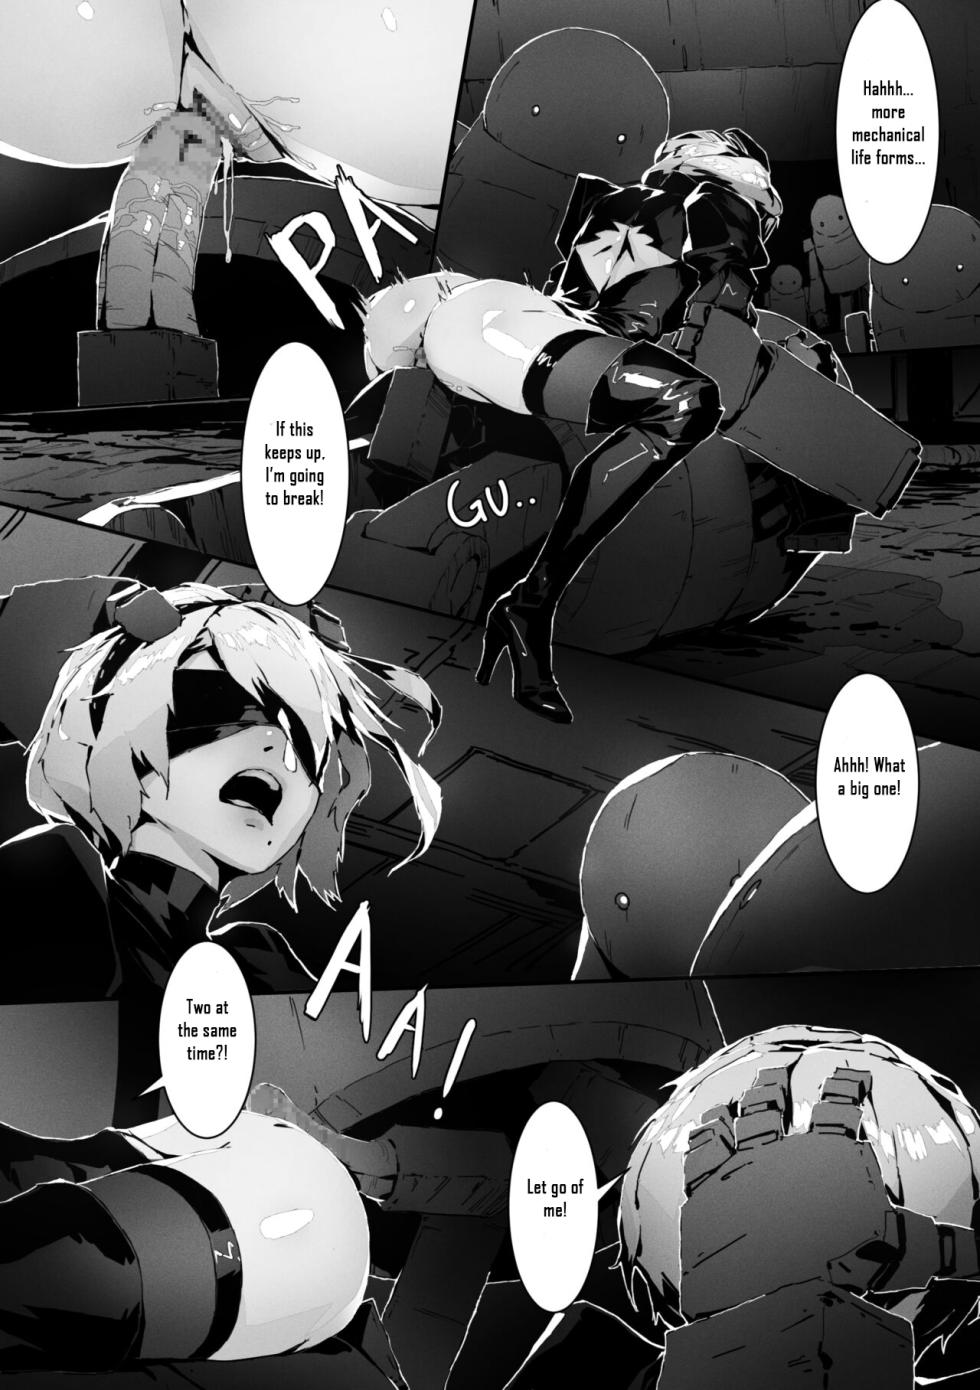 [Tyrant] 2B In Trouble Part 1-6 (NieR:Automata) - Page 18